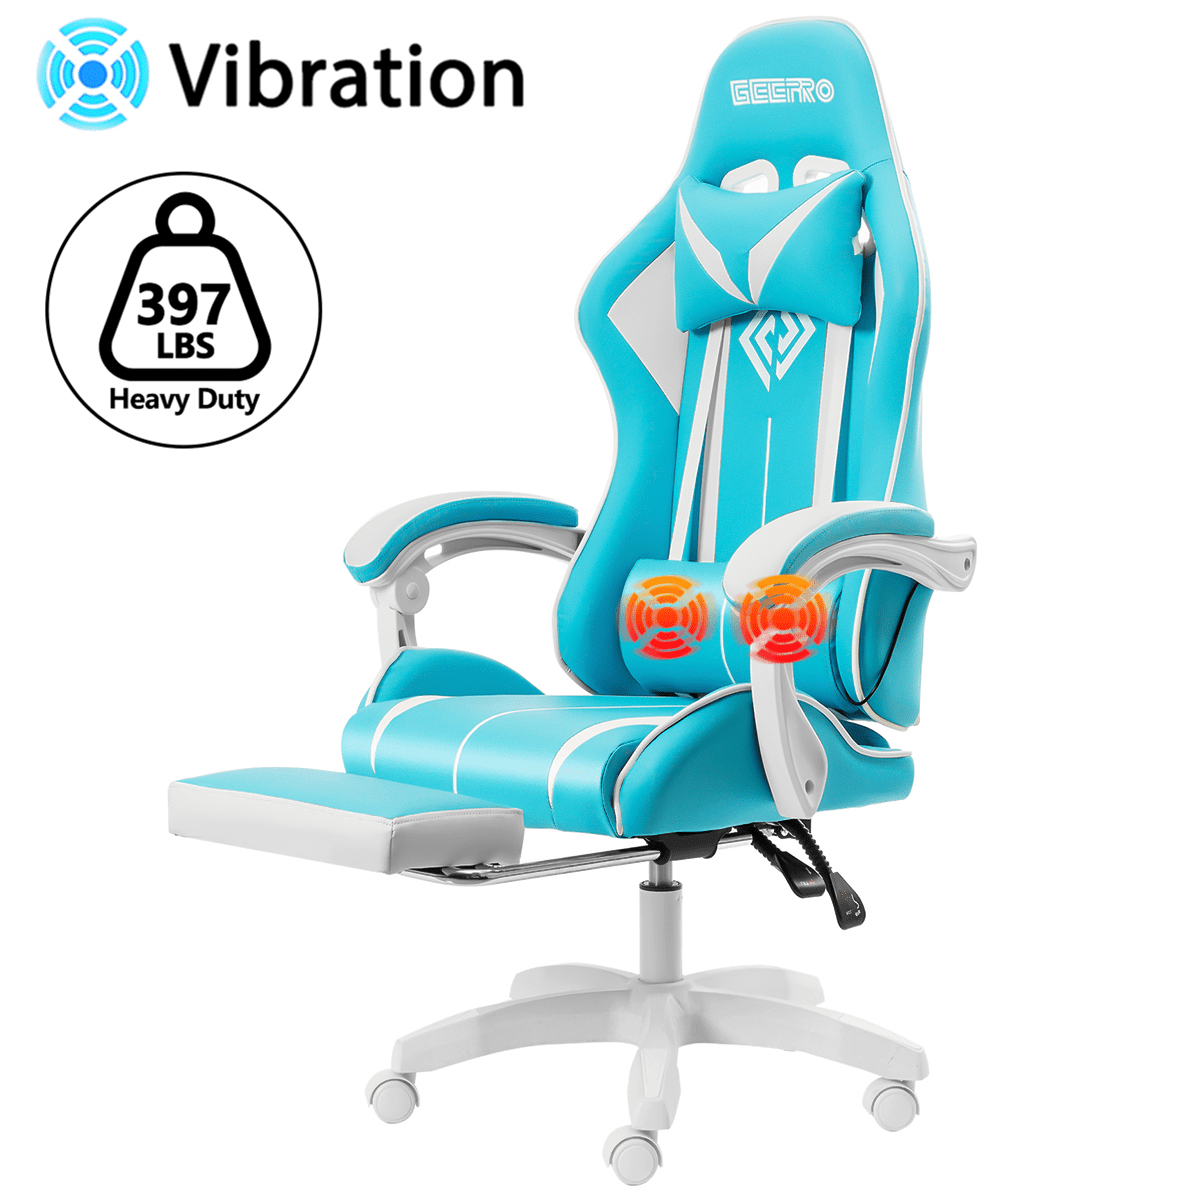 Blue Computer Gaming Leather Chair E-Sports Larger Size Ergonomic Swivel Racing Executive High Back Office Chair with 3D armrests- Adjustable Headrest and Lumbar Support Big and Tall 300lb 